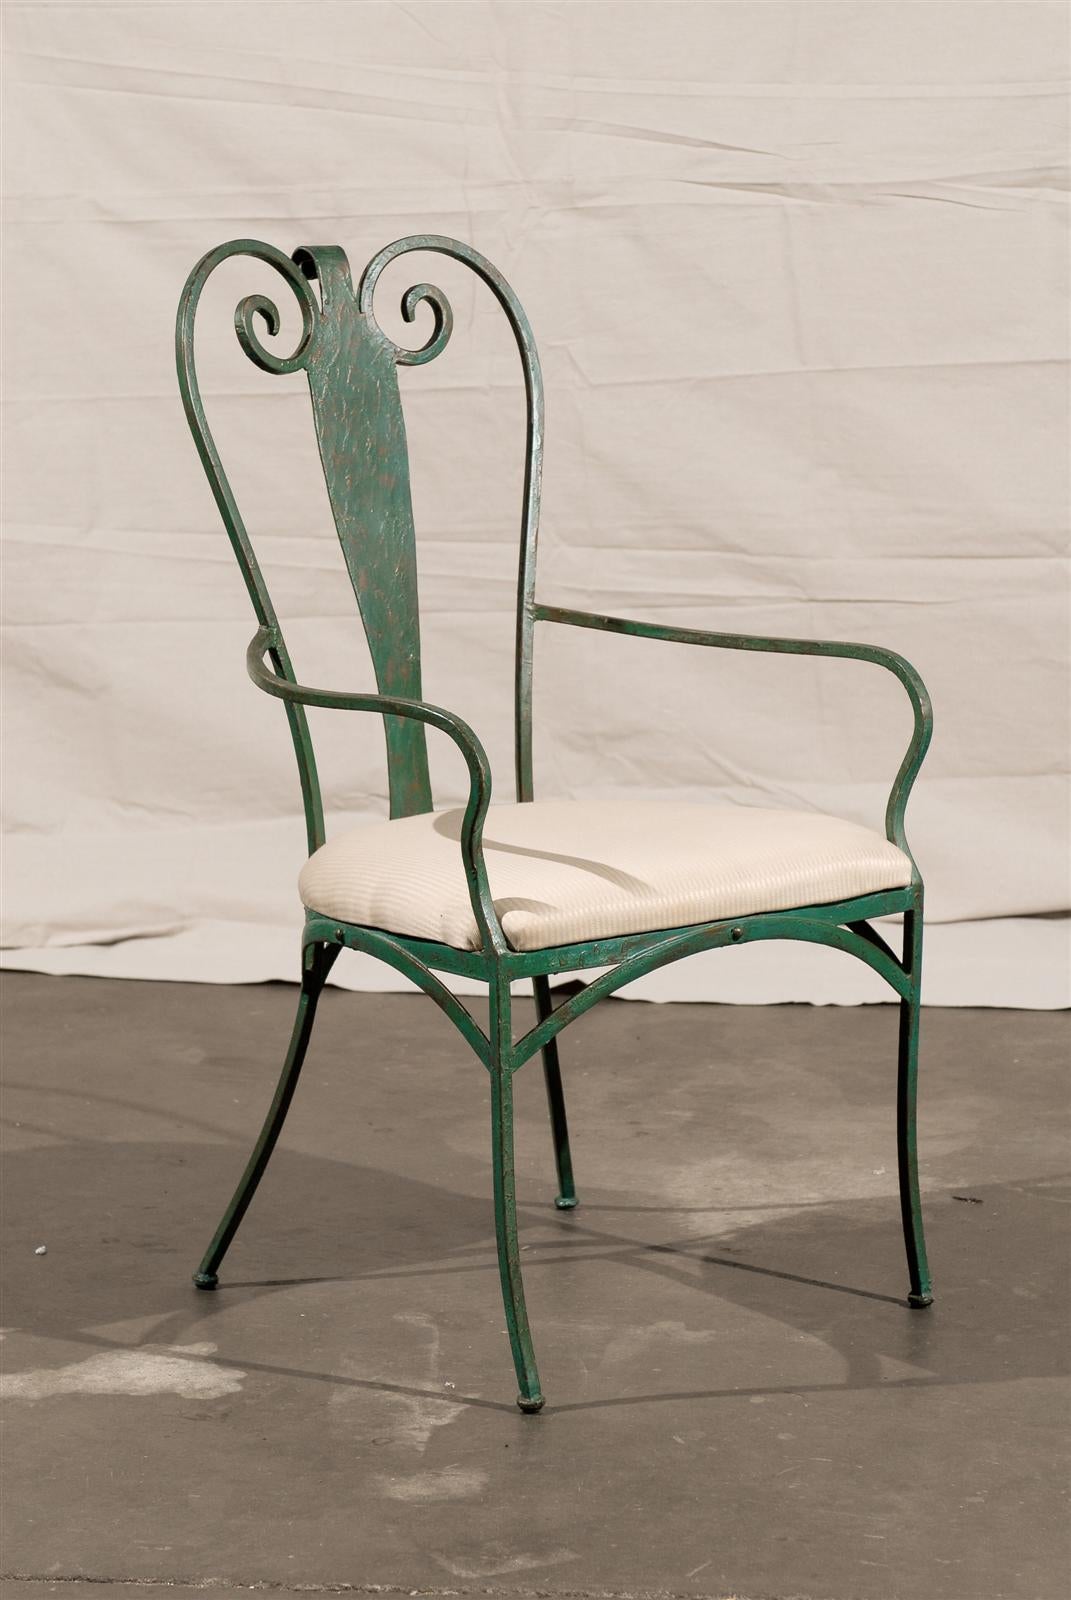 Set of four 20th century French painted iron chairs.
Elegant, comfortable garden chairs